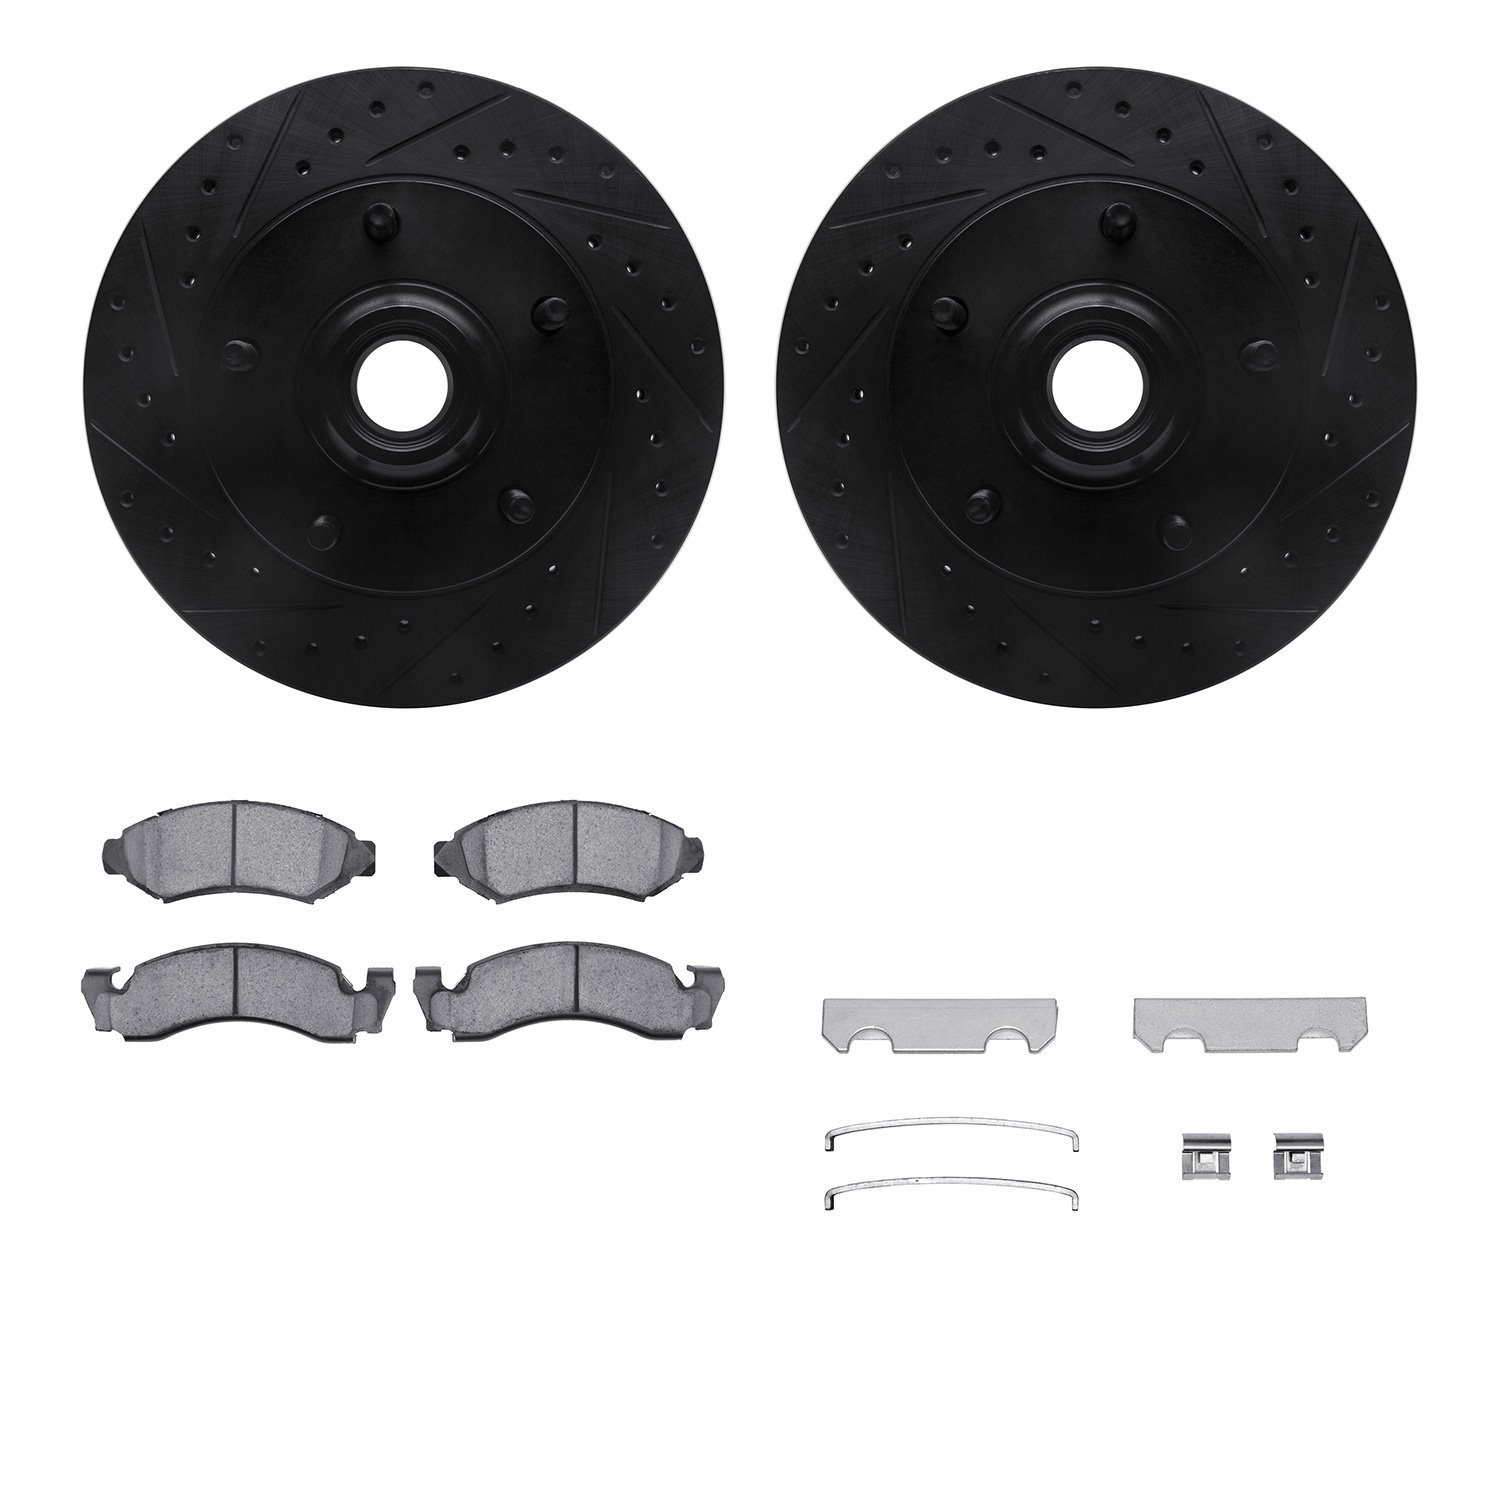 8412-54005 Drilled/Slotted Brake Rotors with Ultimate-Duty Brake Pads Kit & Hardware [Black], 1973-1985 Ford/Lincoln/Mercury/Maz